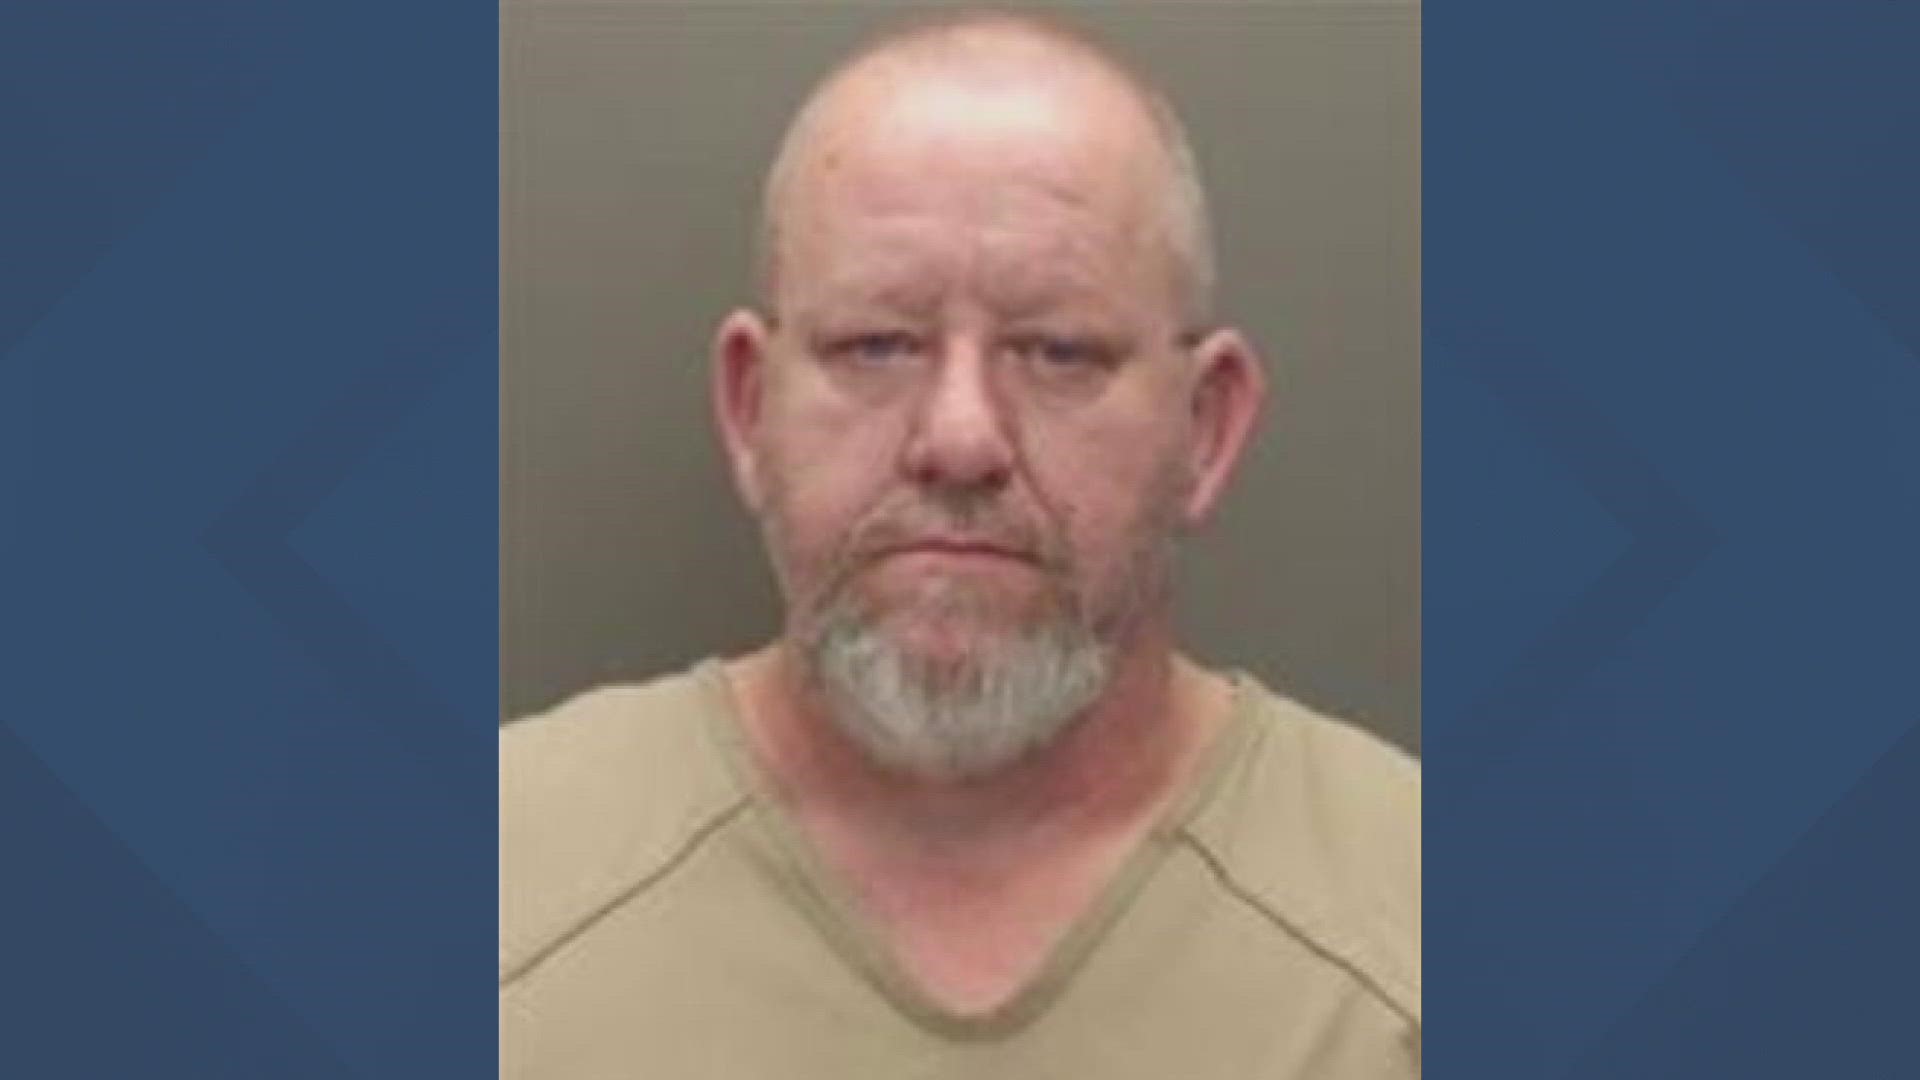 Joseph Ennemoser, of Sugar Grove, was also accused of exposing himself to a 10-year-old girl walking to school in Hilliard last September.